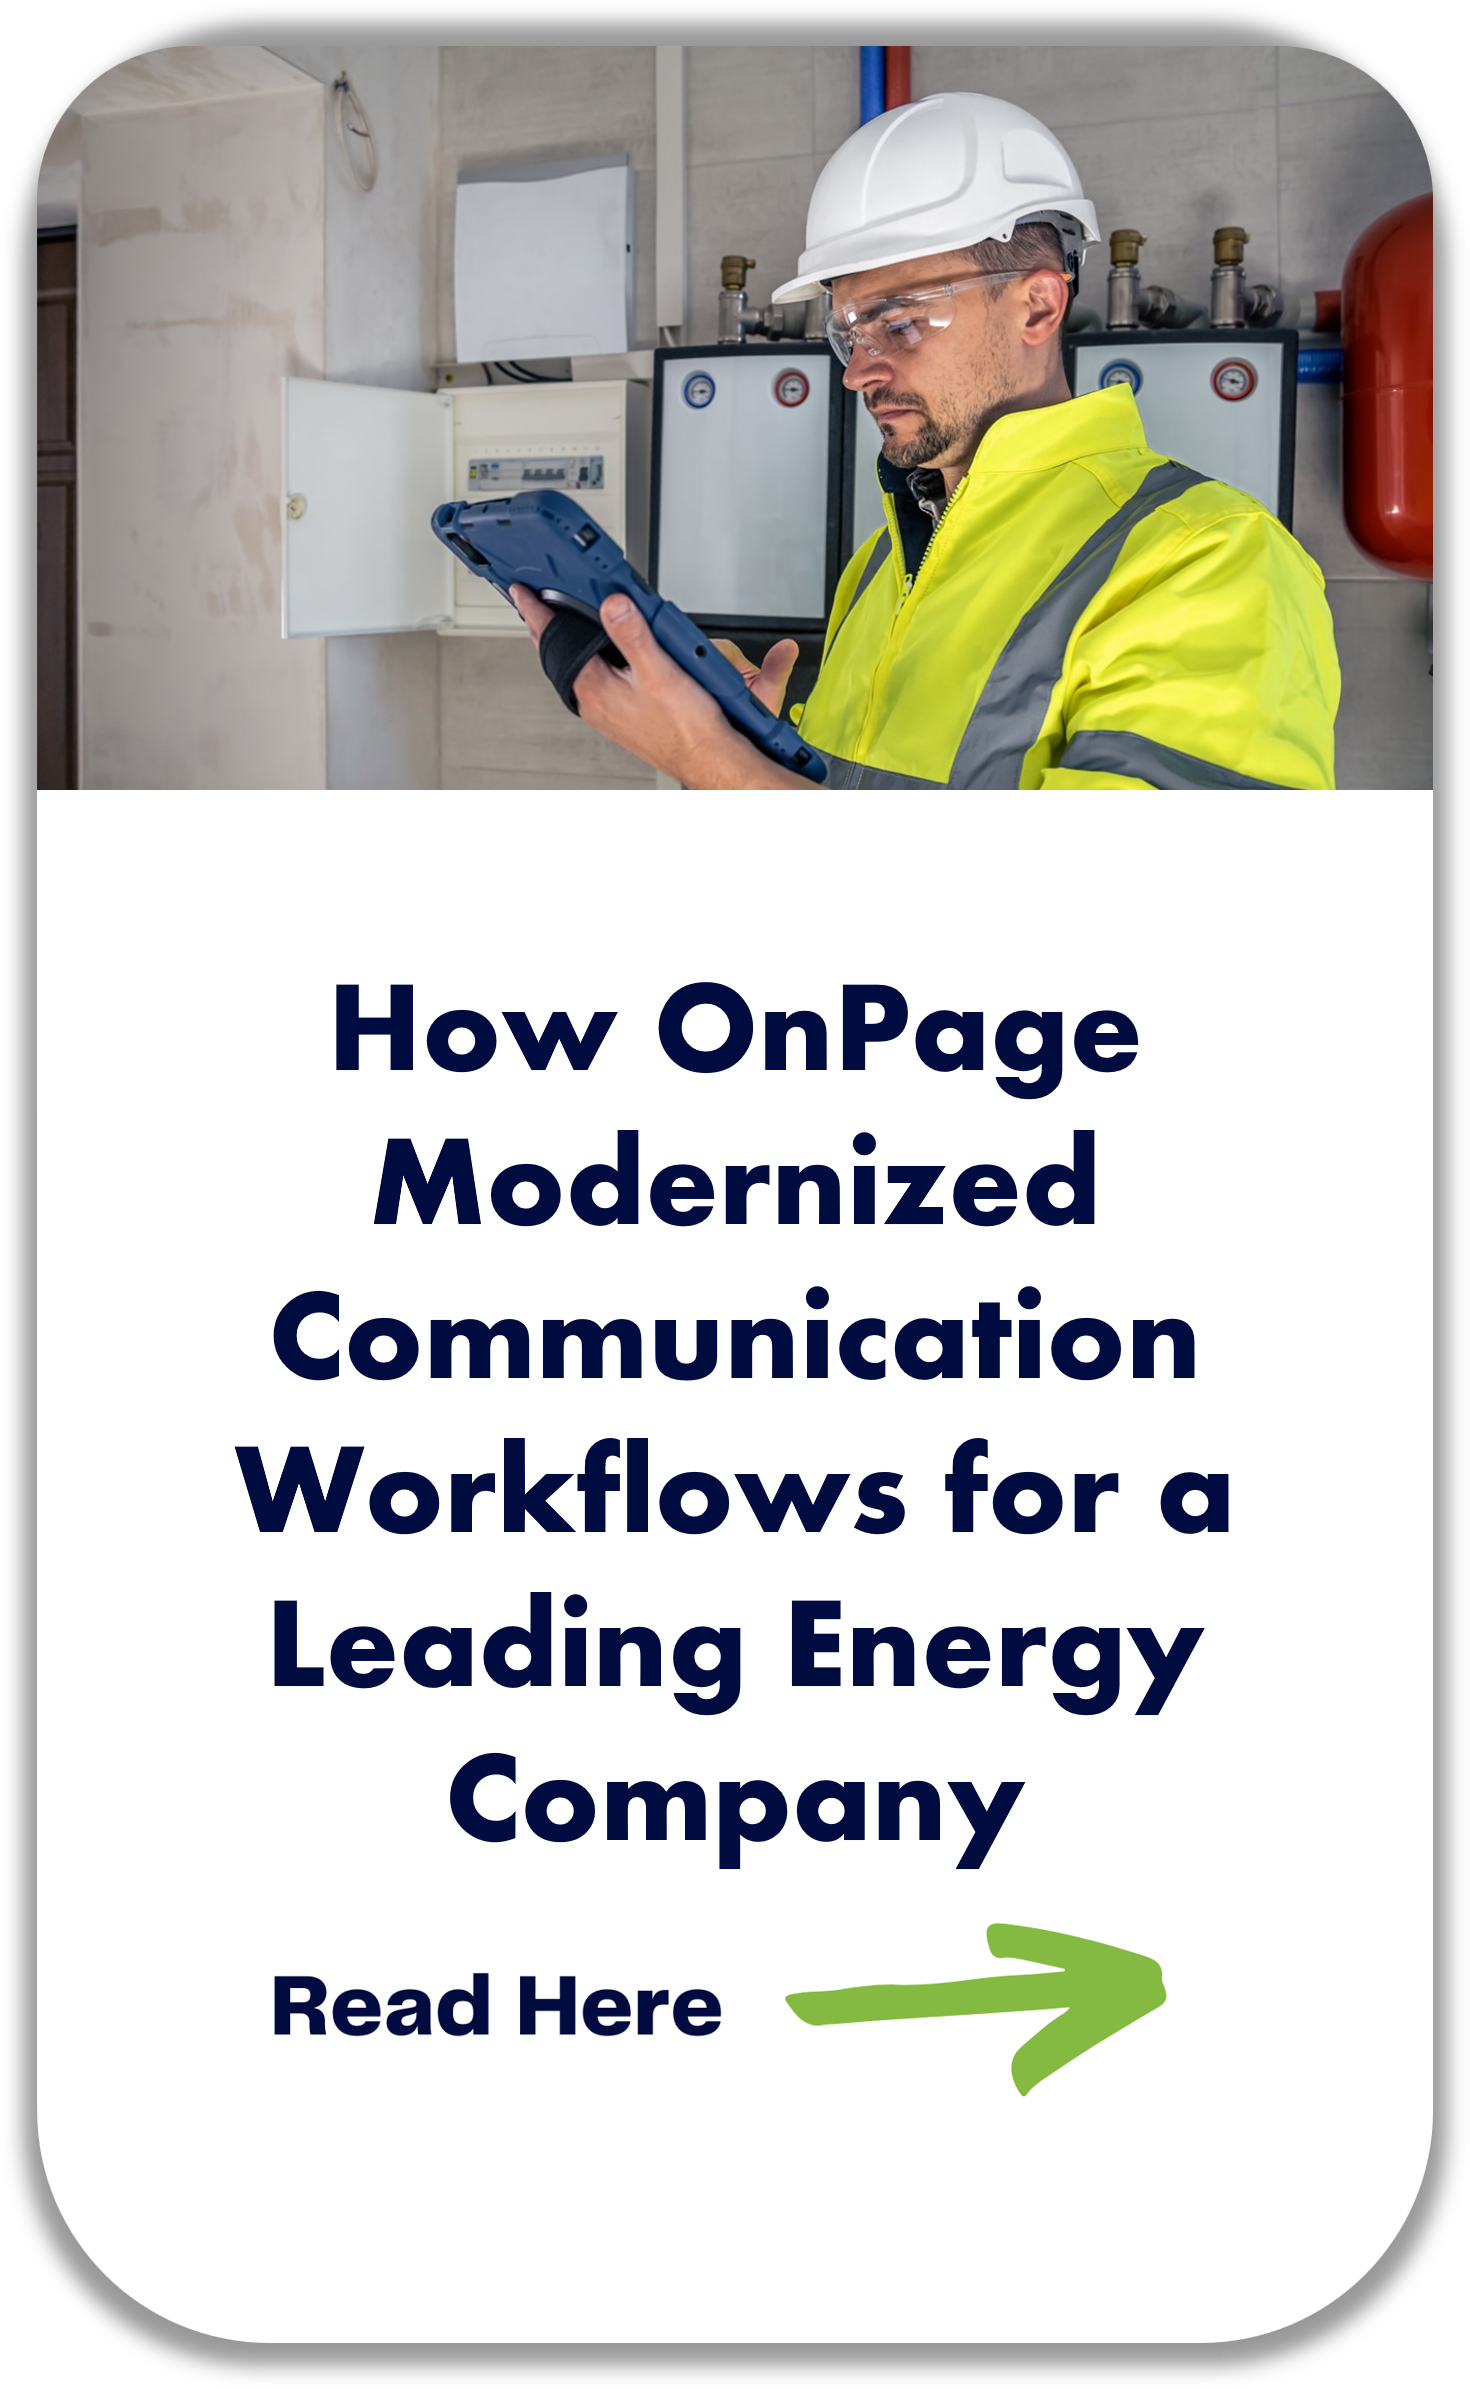 OnPage and energy company case study